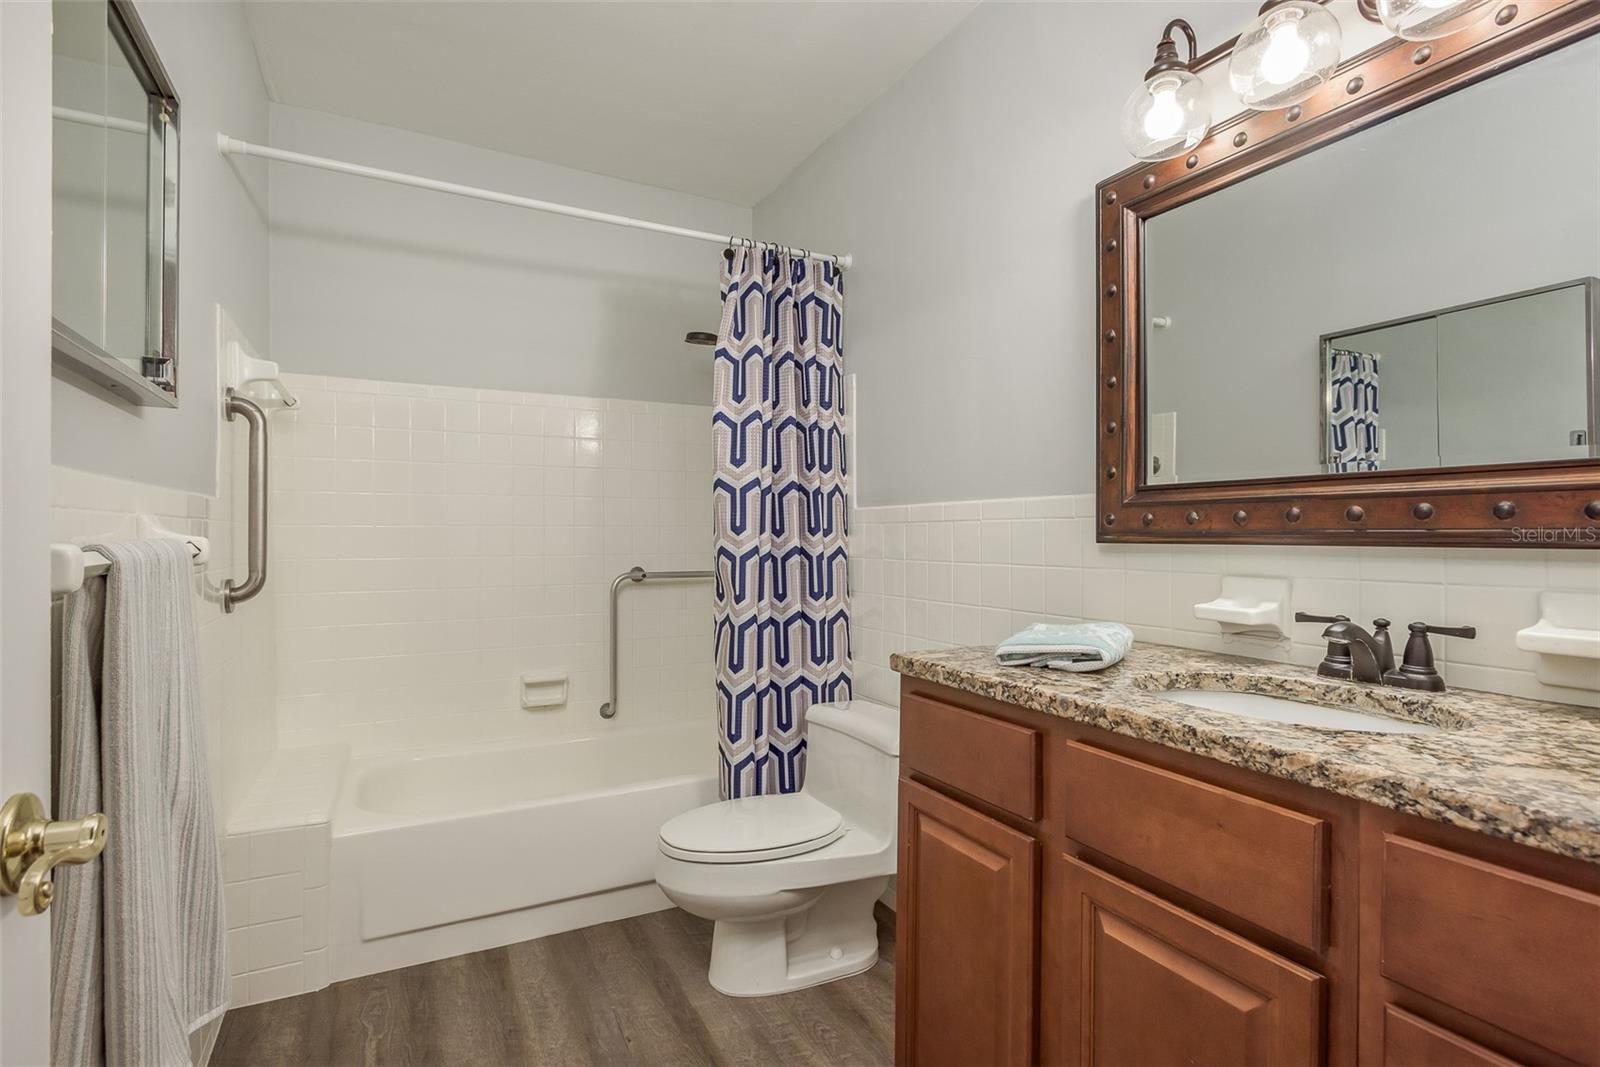 Beautifully updated guest bathroom!!